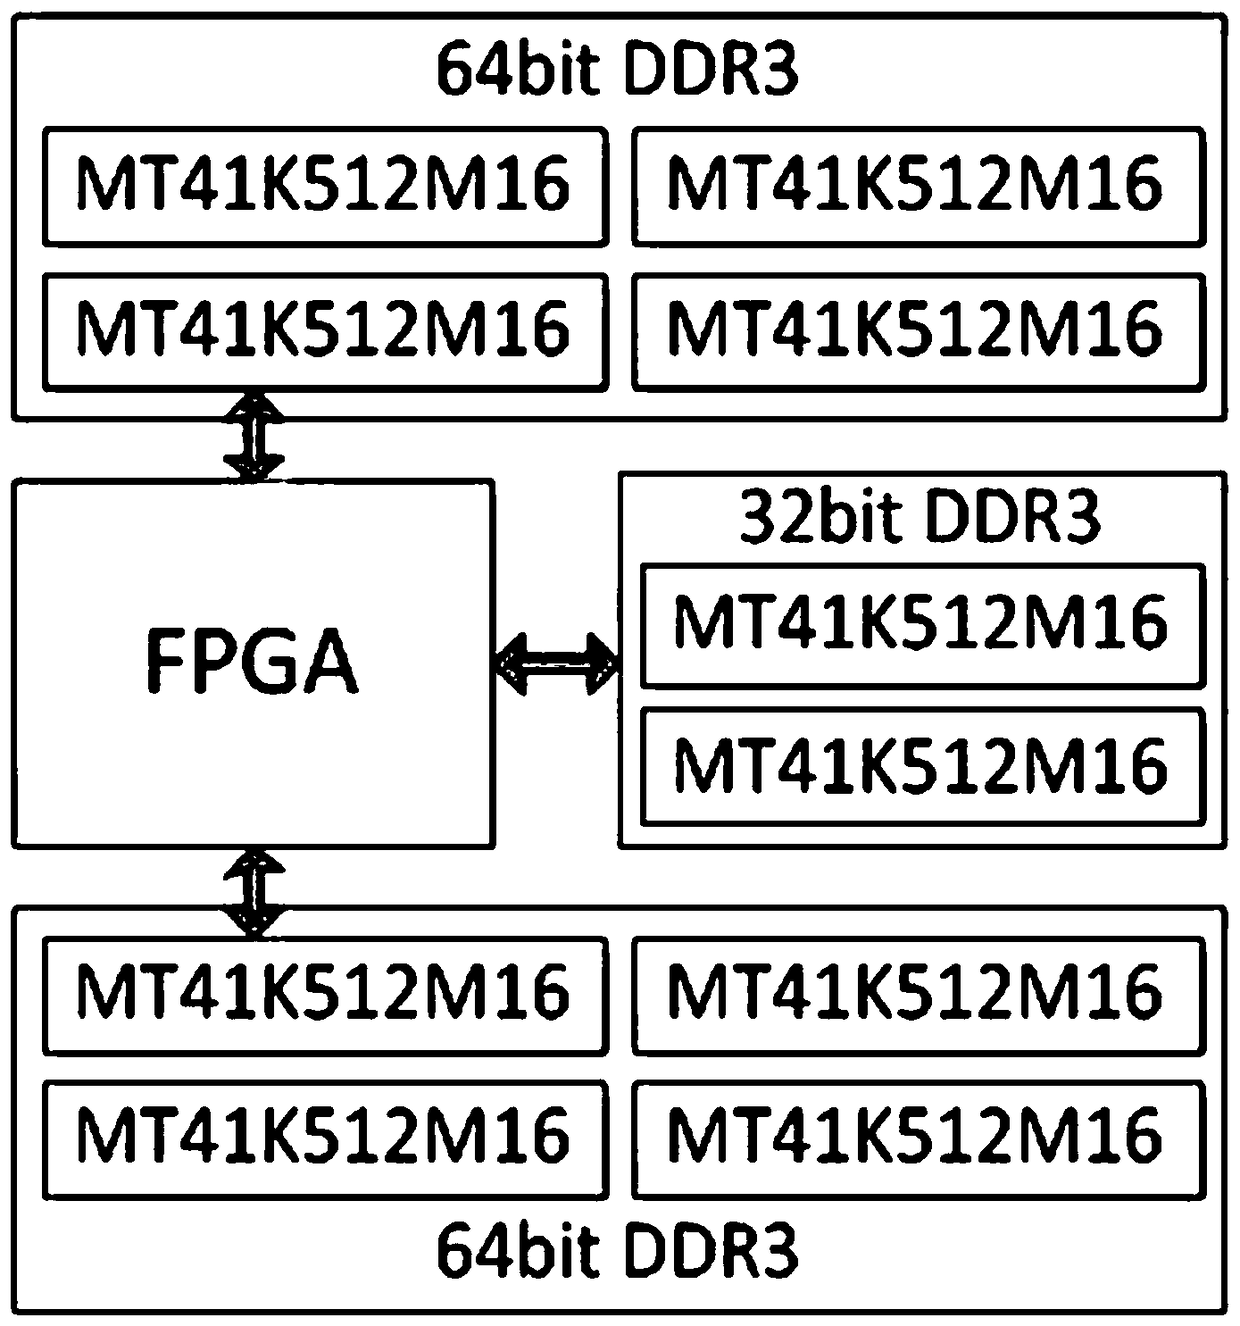 High-speed mass formulated storage and feature preserving method for multisource unformatted broadband data